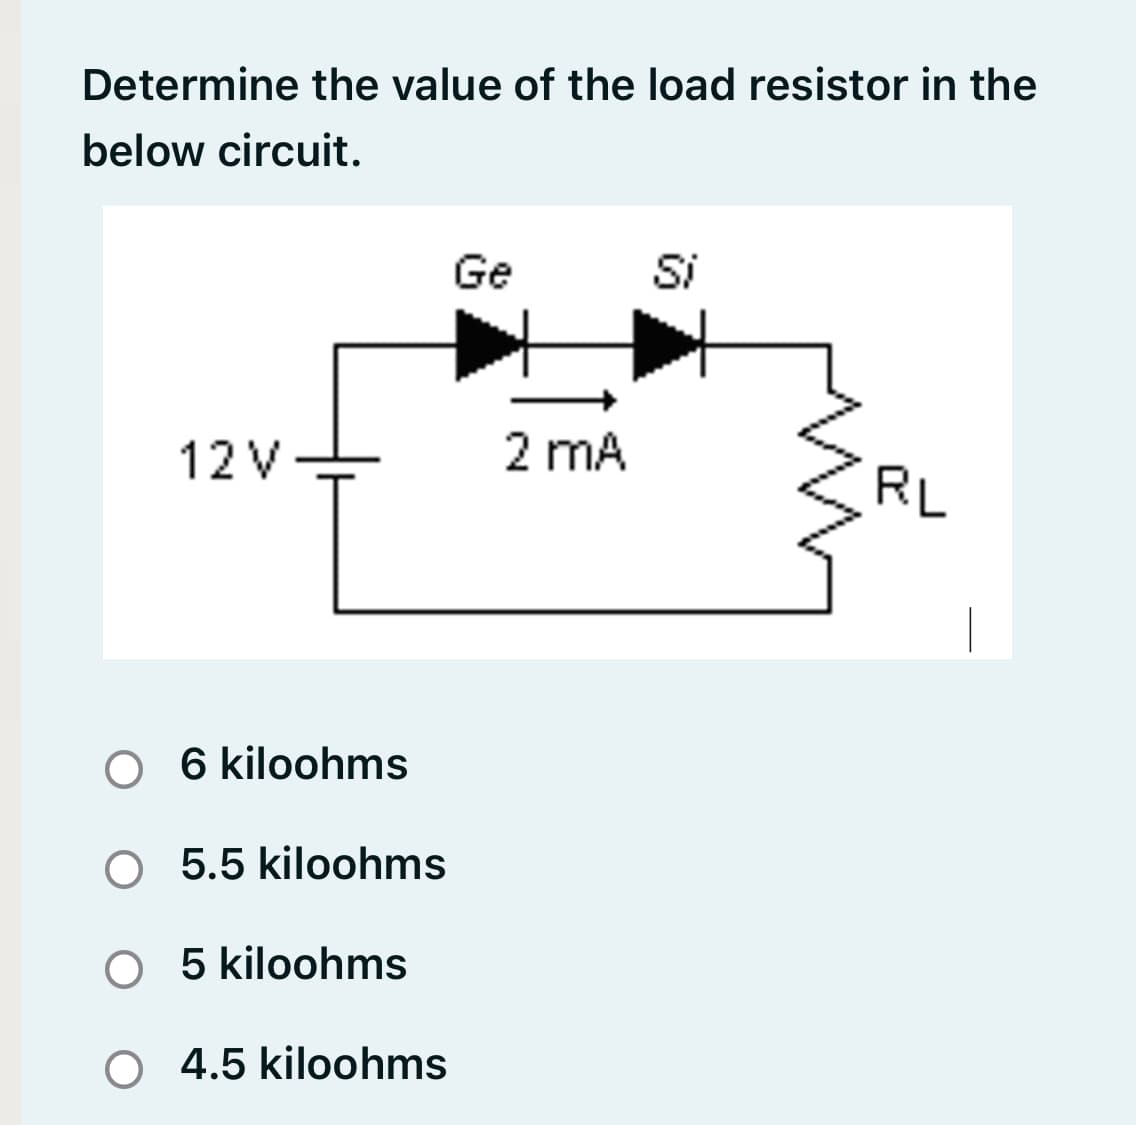 Determine the value of the load resistor in the
below circuit.
Ge
Si
12V
2 mA
RL
O 6 kiloohms
5.5 kiloohms
O 5 kiloohms
O 4.5 kiloohms
